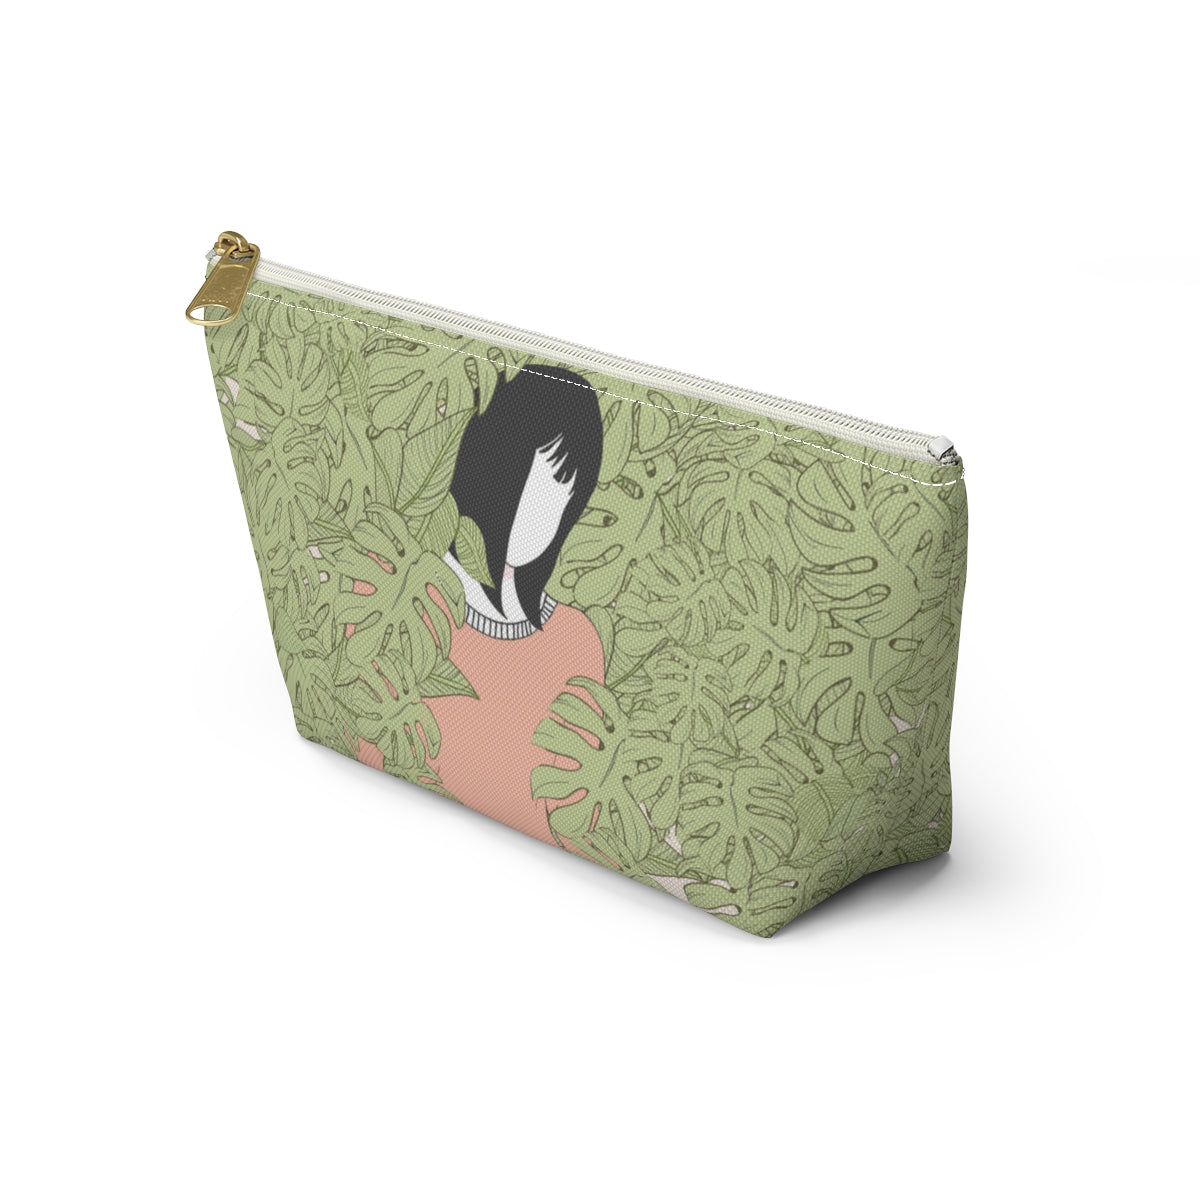 Girl in Foliage Makeup Pouch